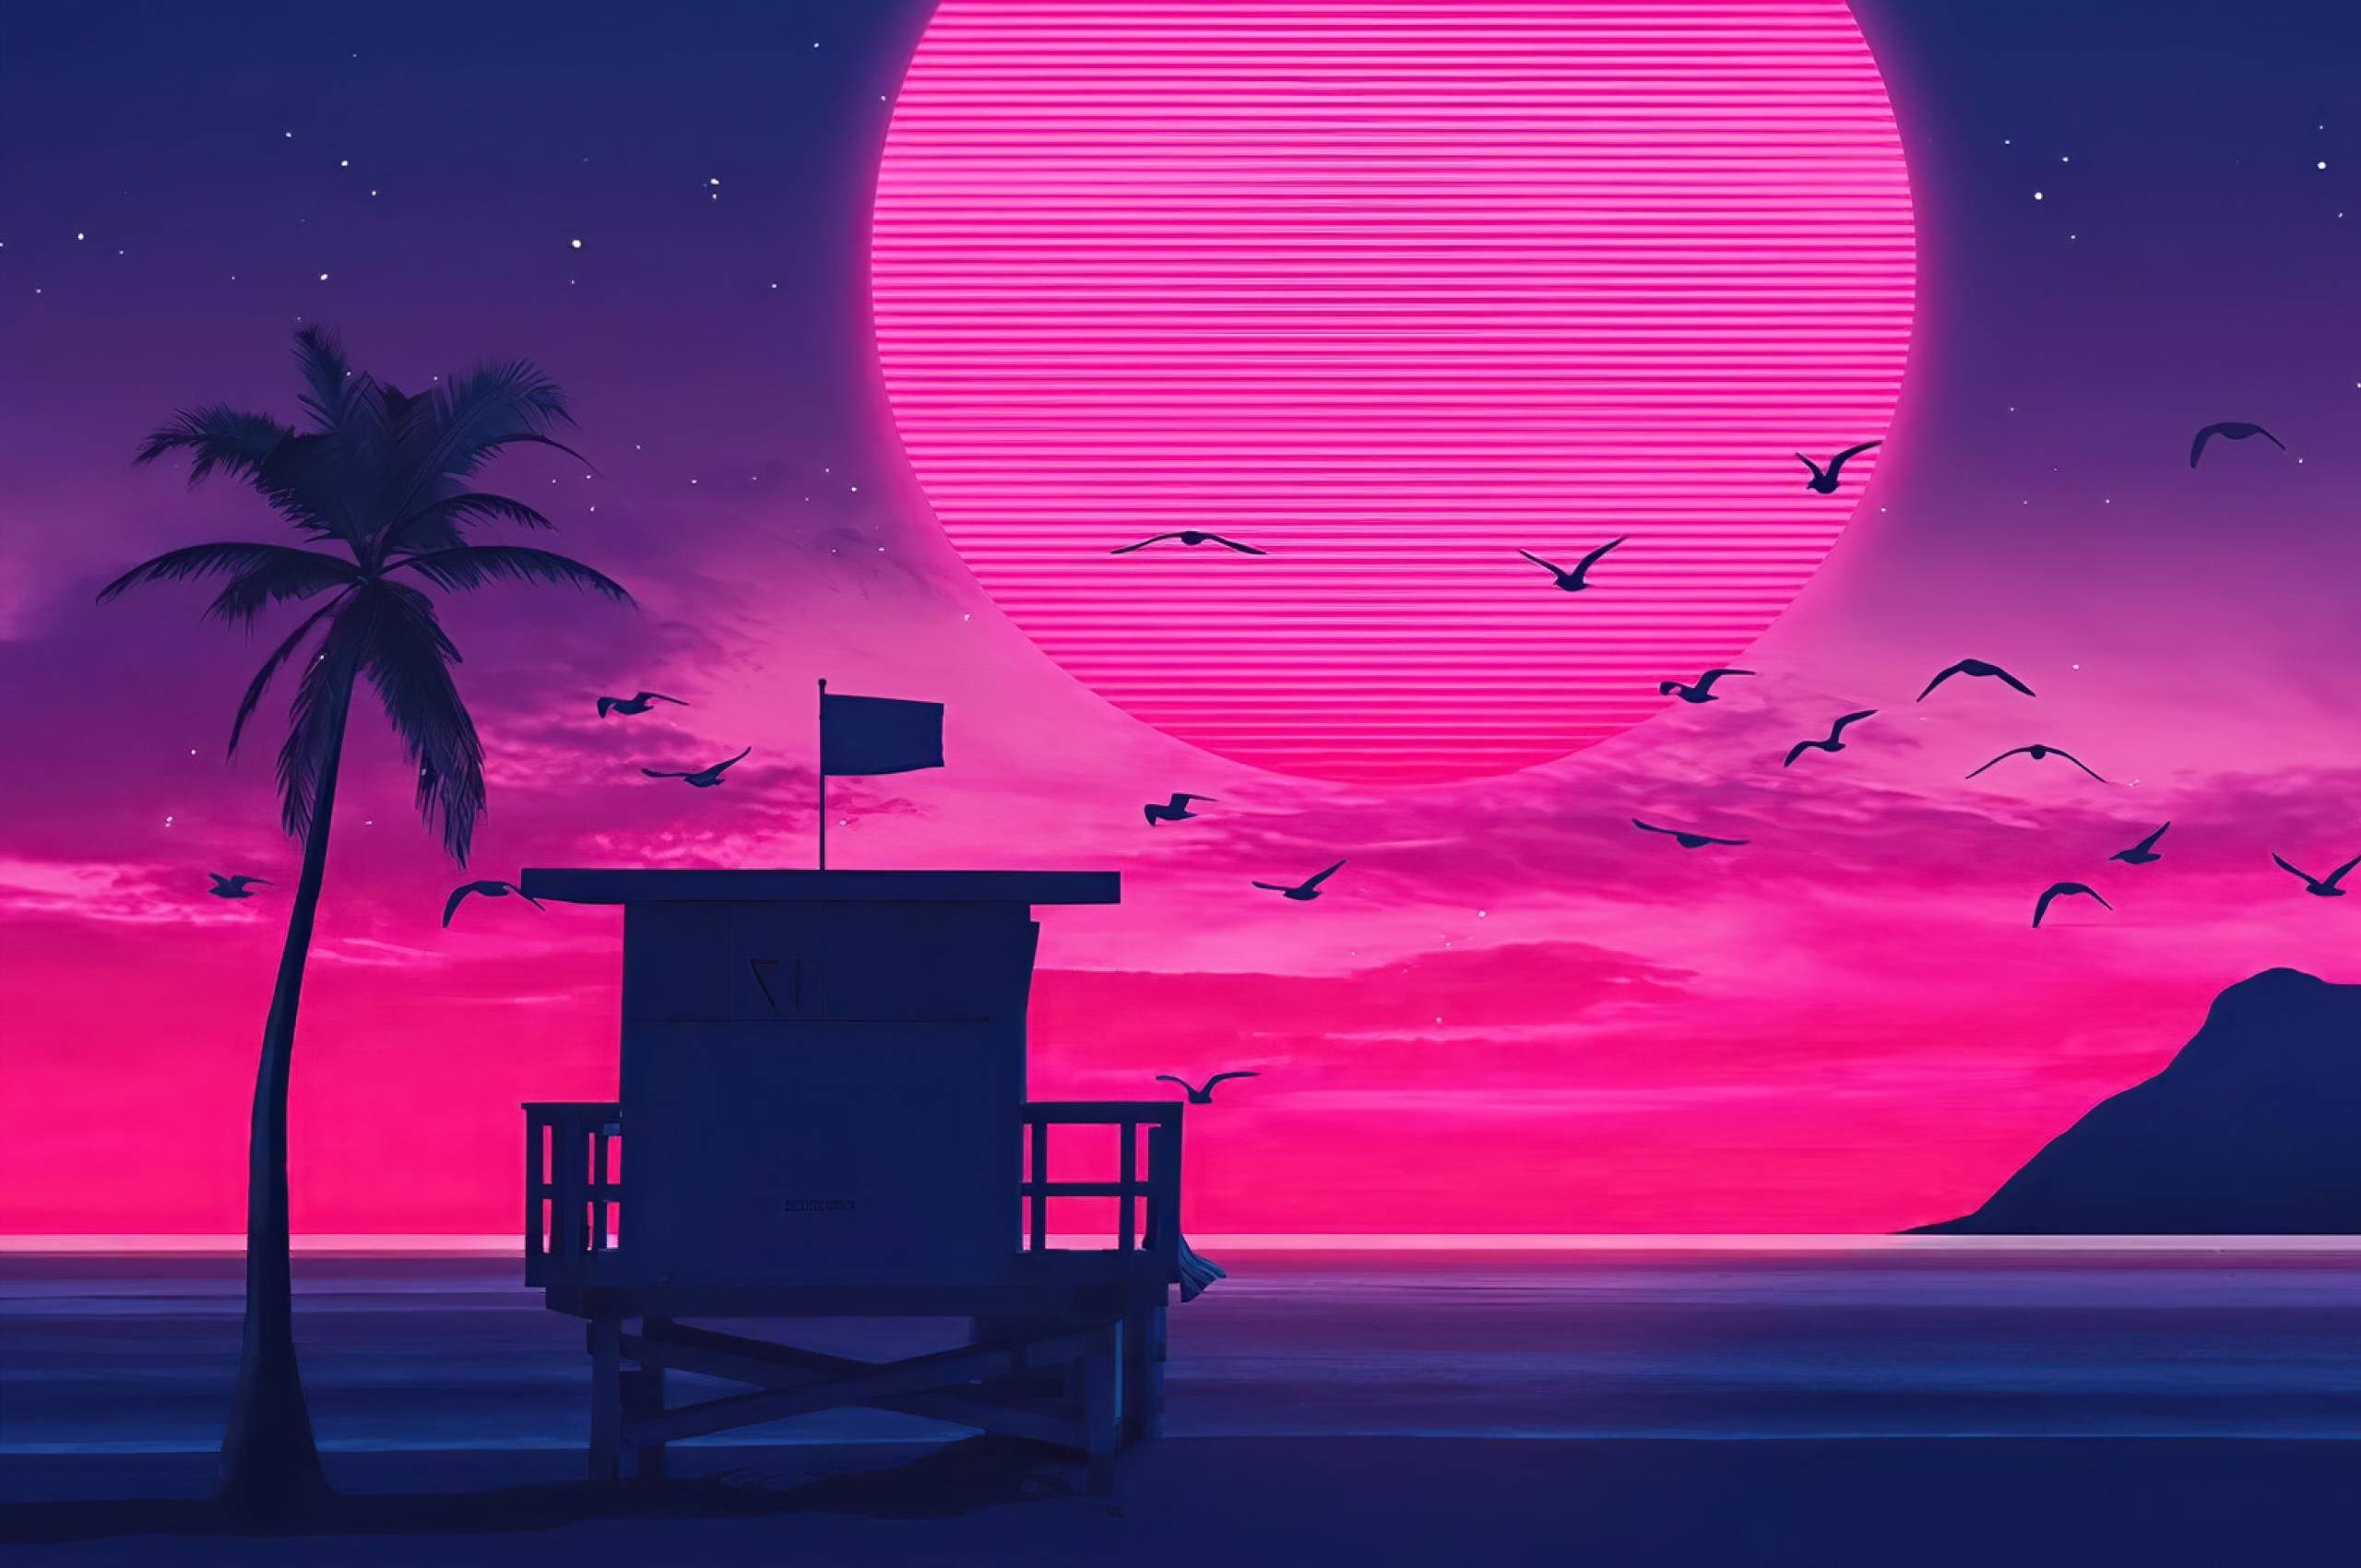 A sunset scene with palm trees and birds - Chromebook